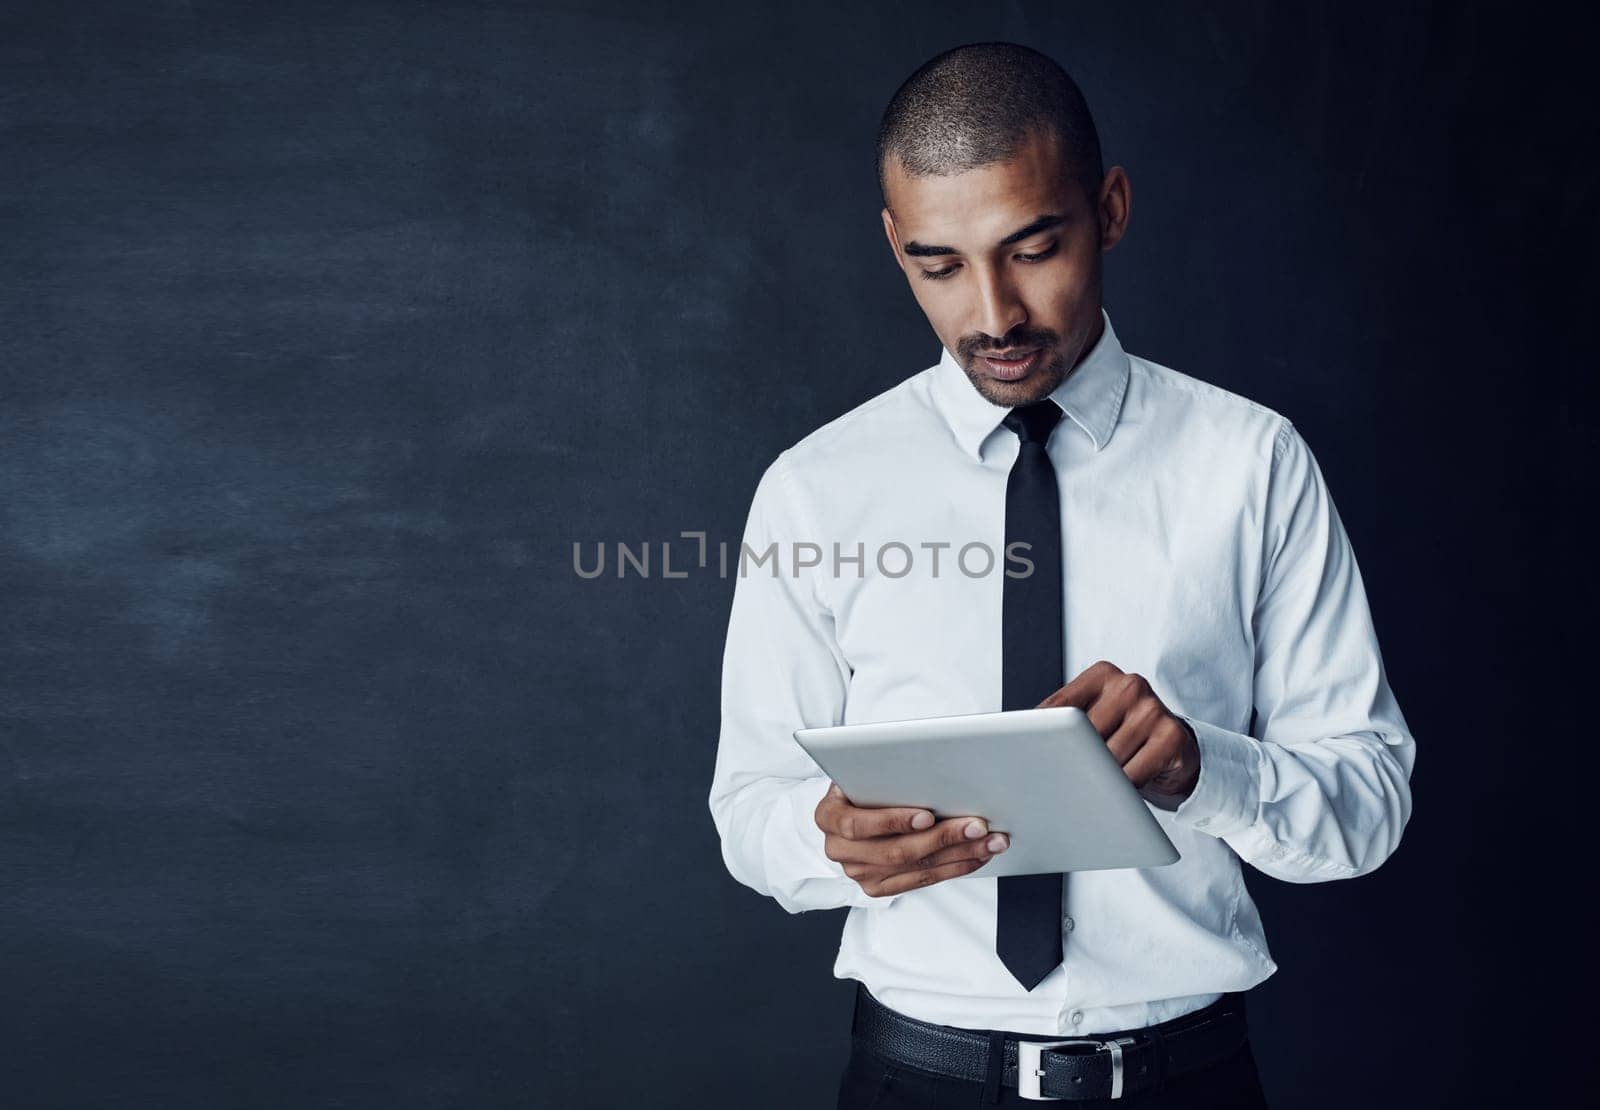 There to help you take care of the hard work. Studio shot of a young businessman using a digital tablet against a dark background